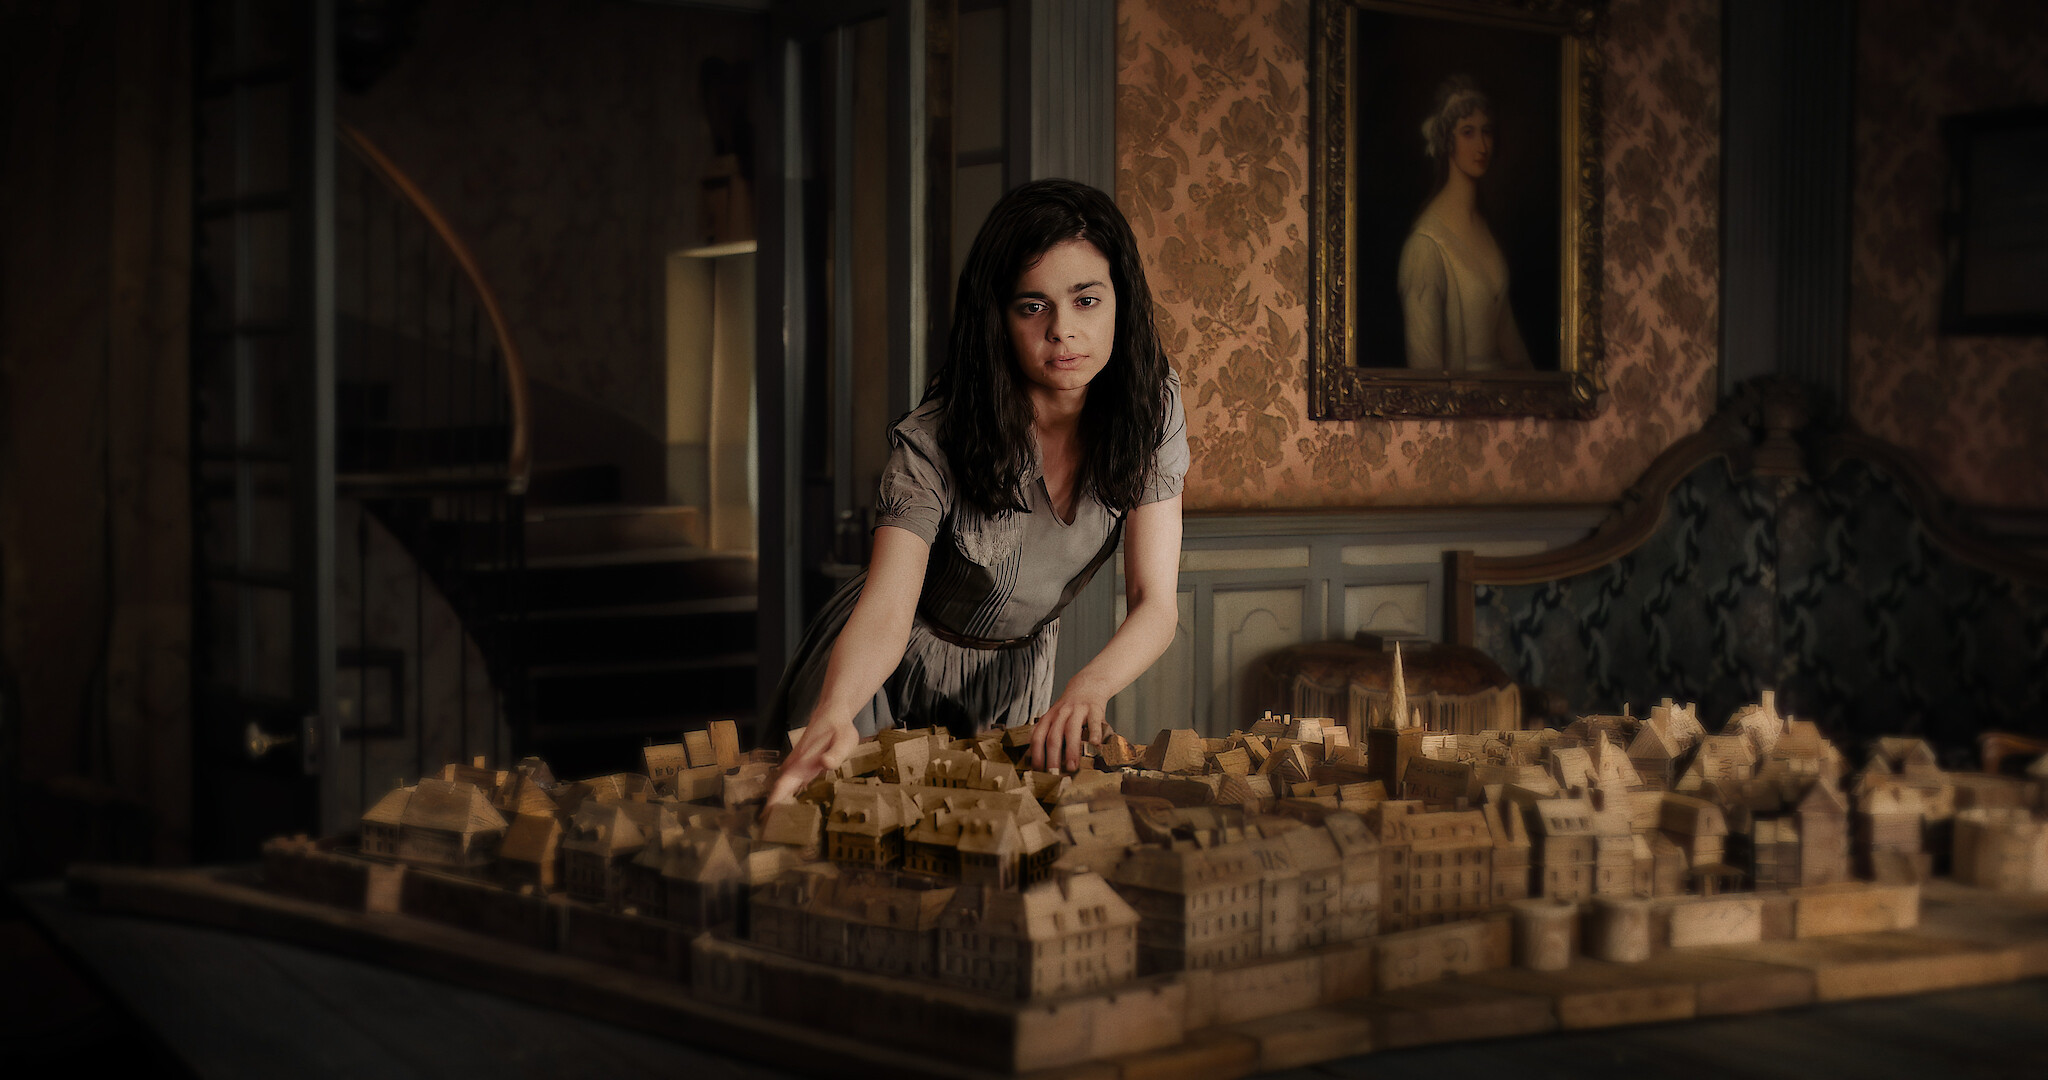 Aria Mia Loberti as Marie-Laure in episode 101 of All the Light We Cannot See.